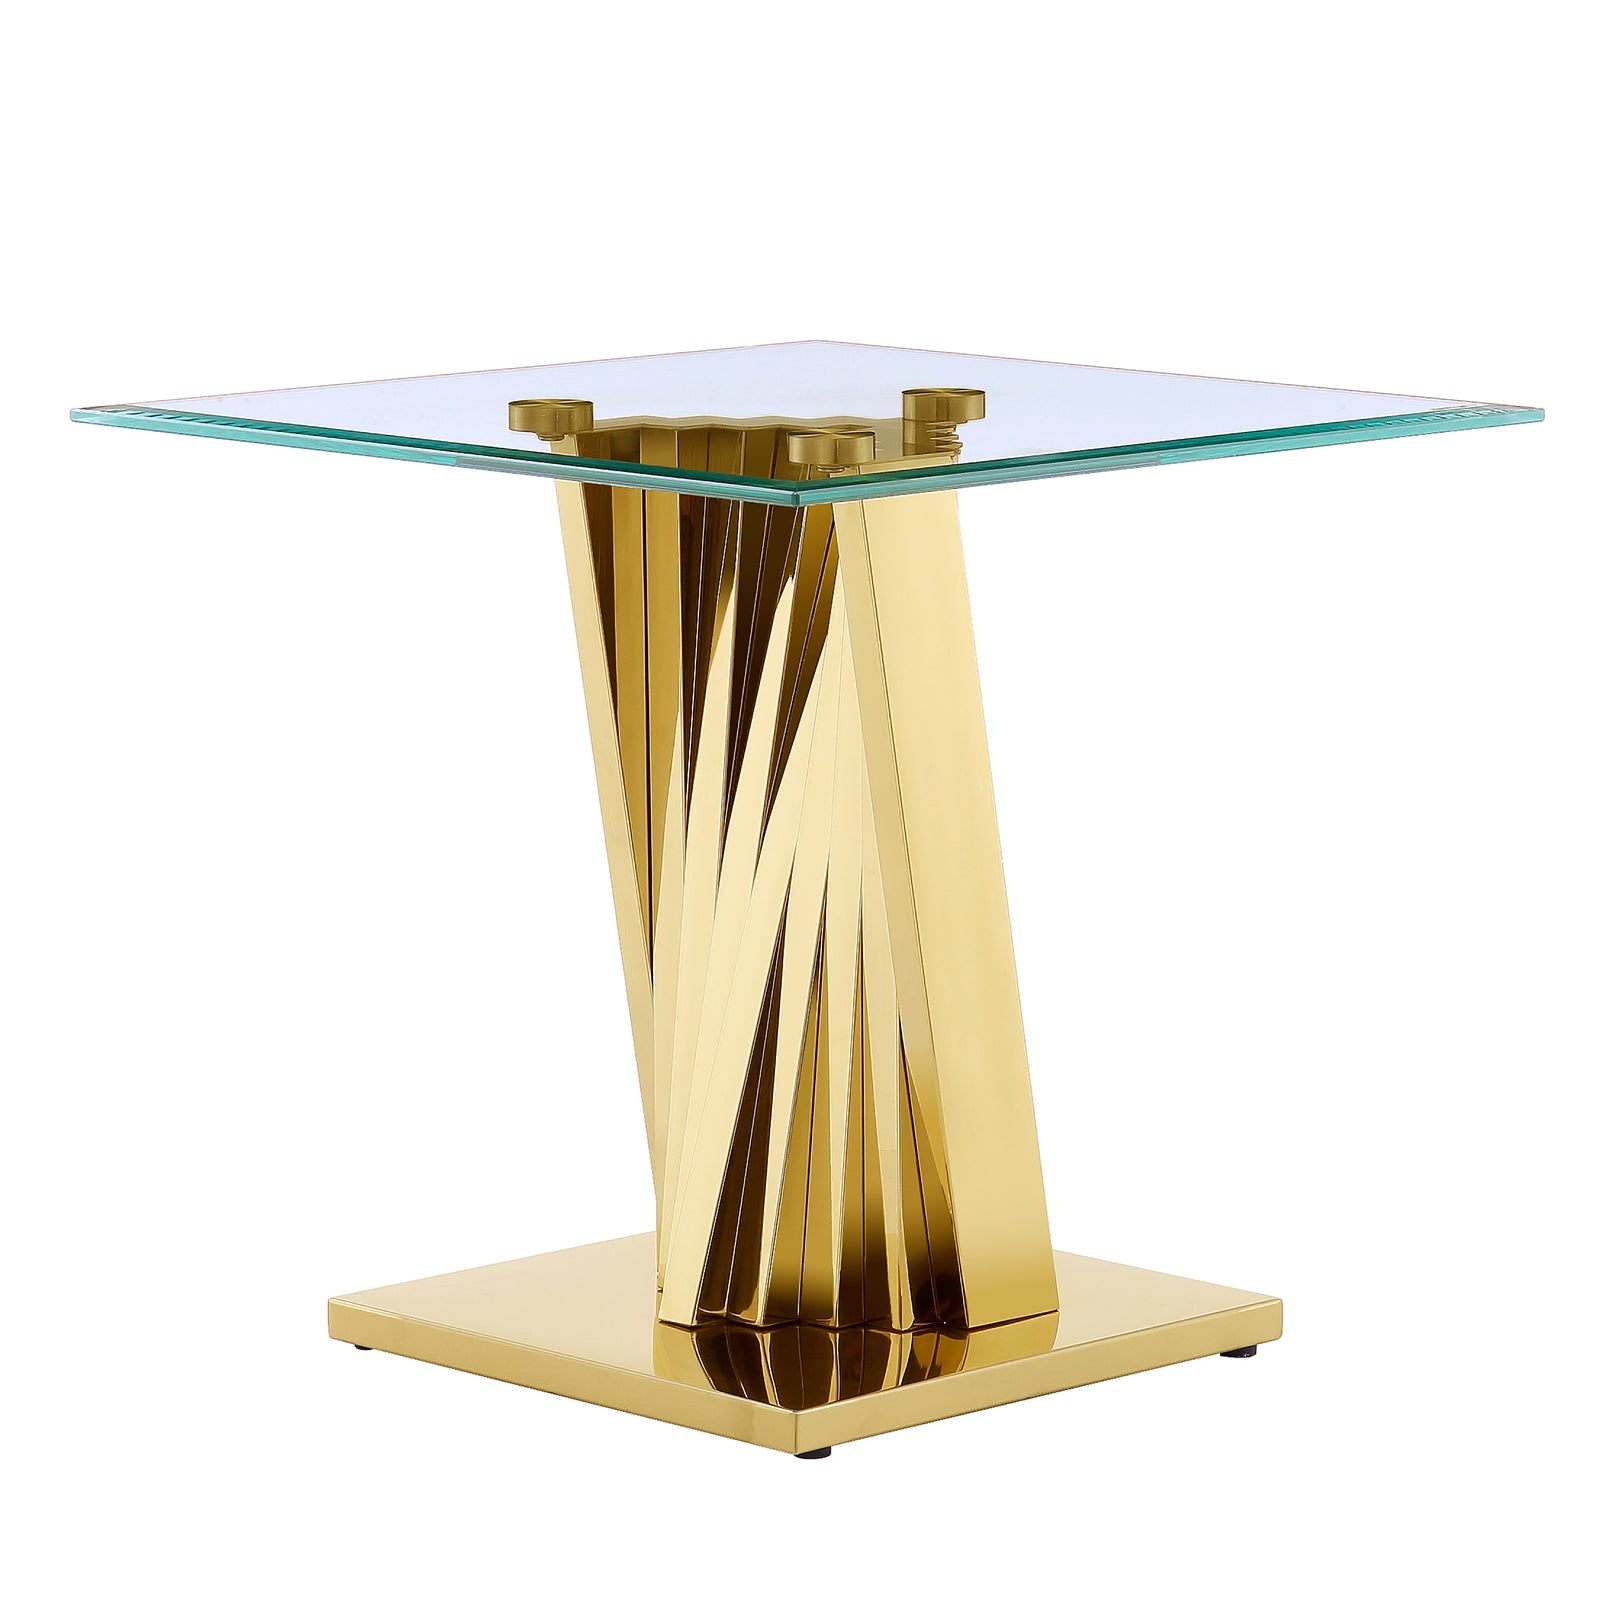 The AUZ Glass End Table with Polished Stainless Steel Base: A Perfect Blend of Elegance and Practicality